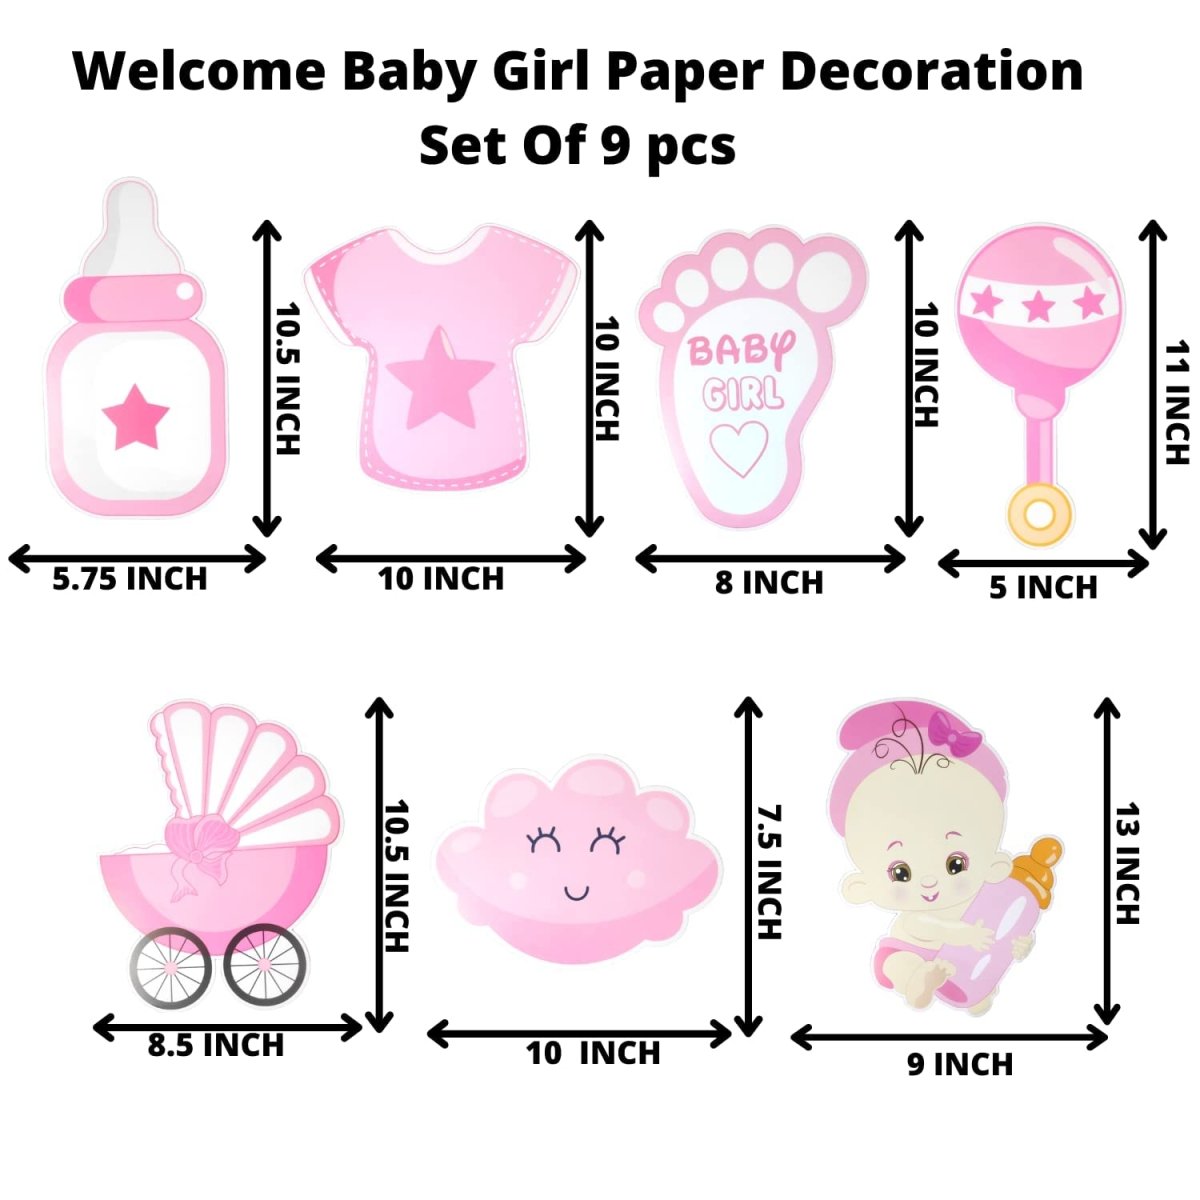 Welcome Decoration Kit For baby girl